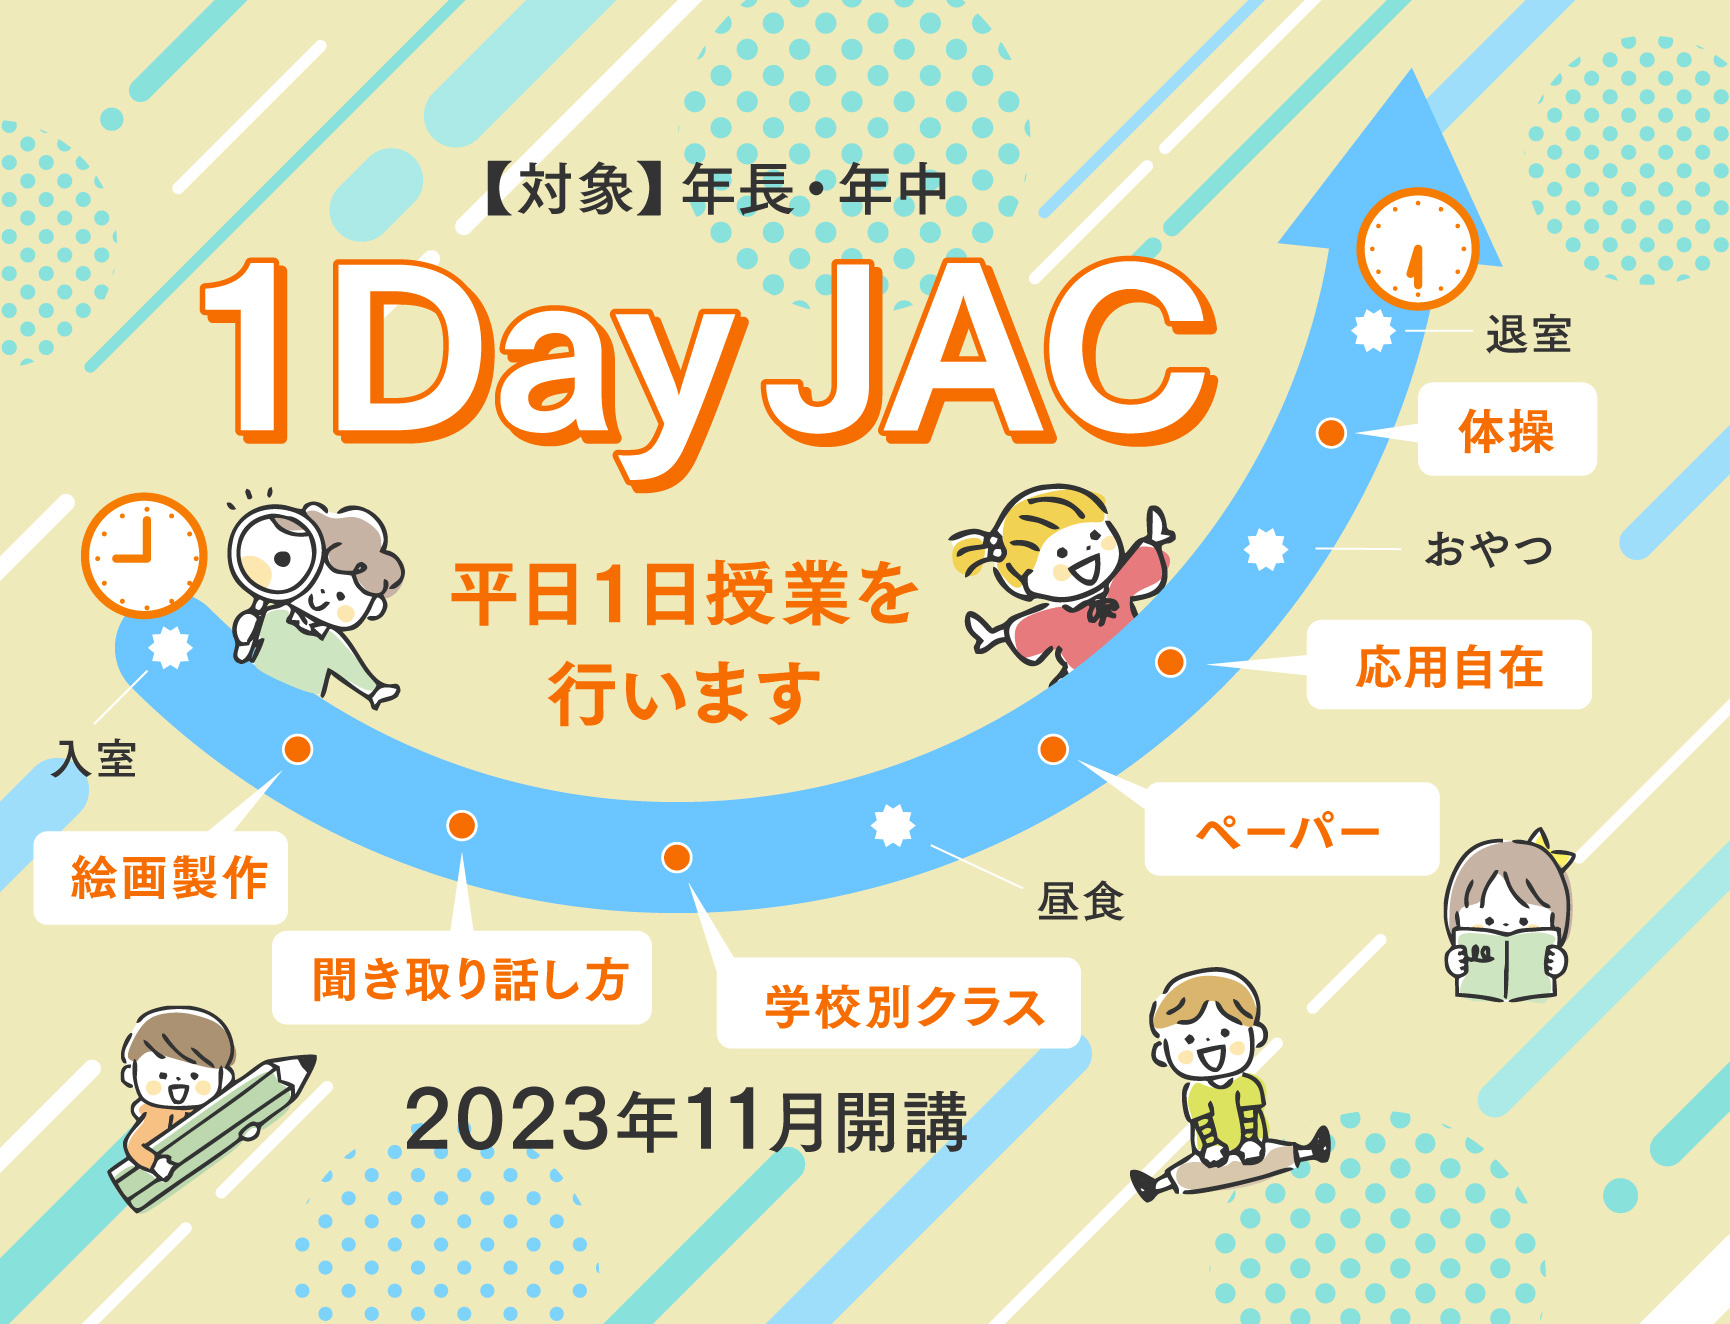 1Day_JAC